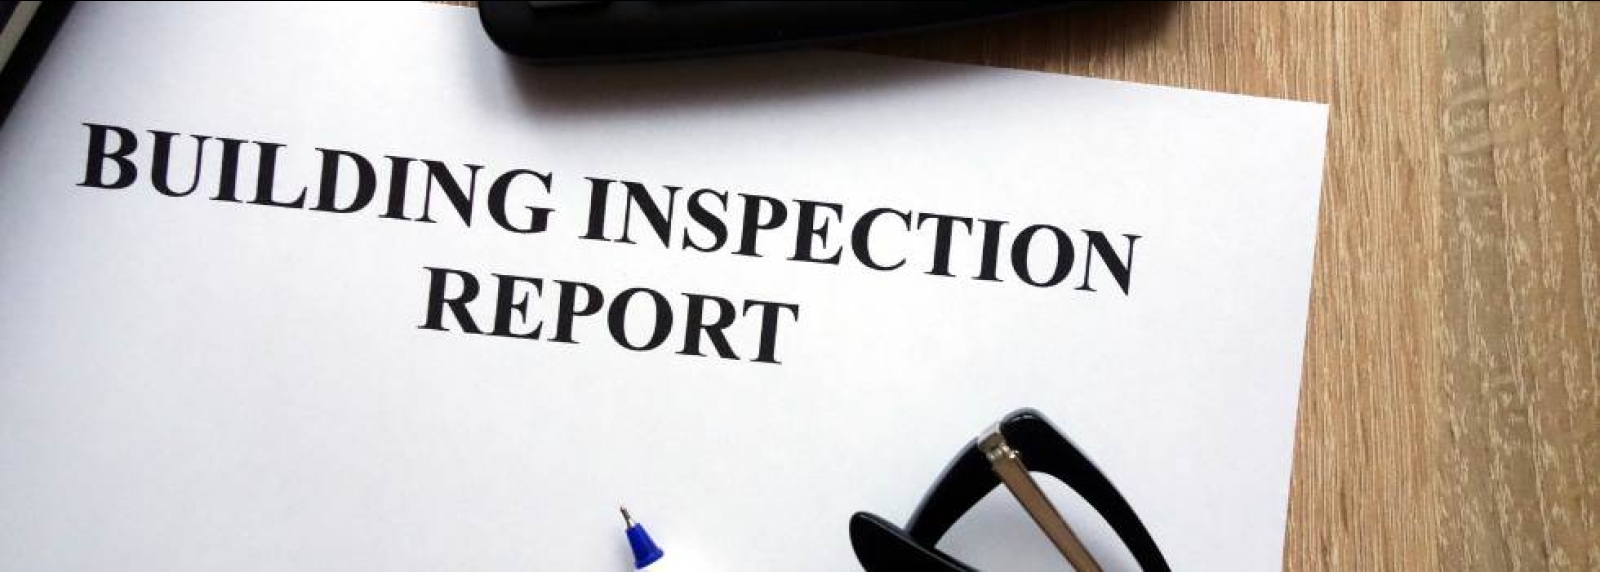 Building Inspection Reports Island Beach